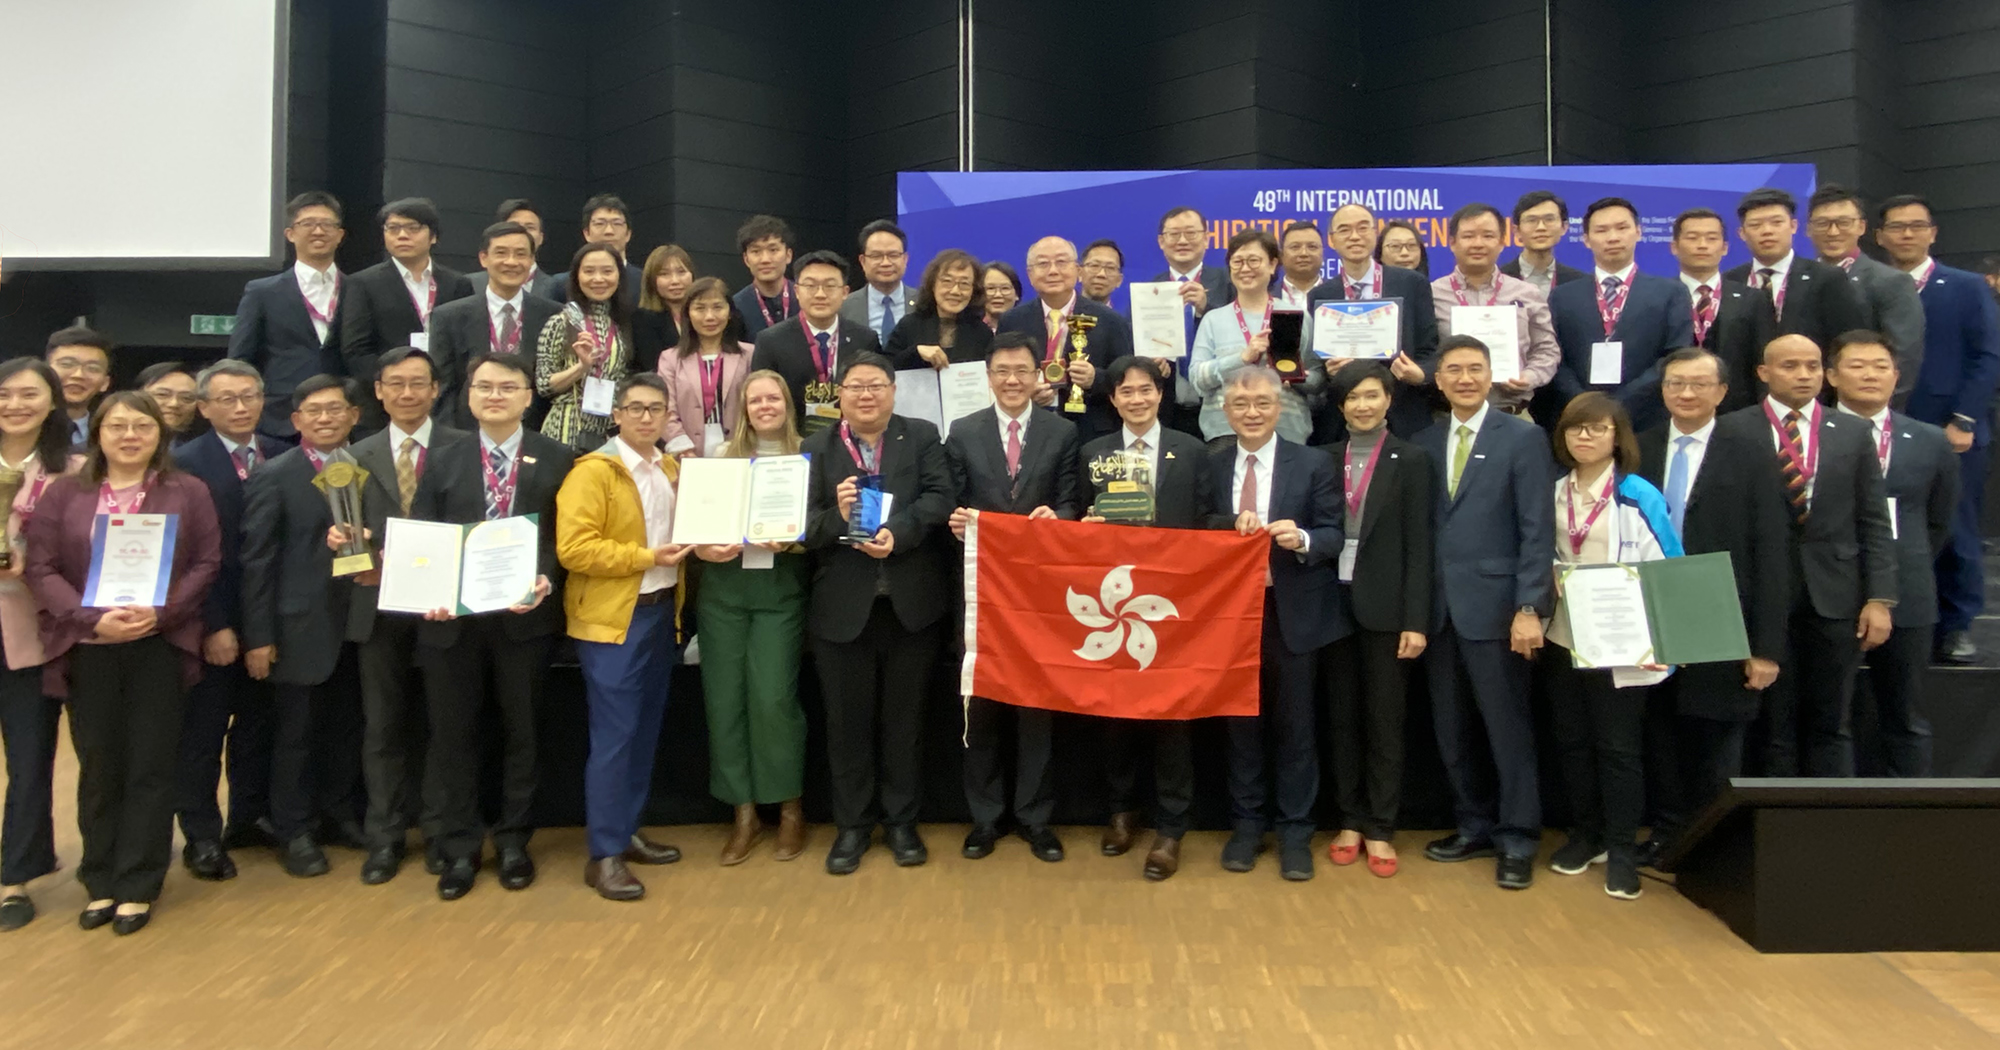 PolyU’s innovations garnered 31 prizes at the 48th Geneva Inventions Expo, alongside the achievements of other Hong Kong delegations, cementing Hong Kong’s reputation as a key innovation and technology hub.